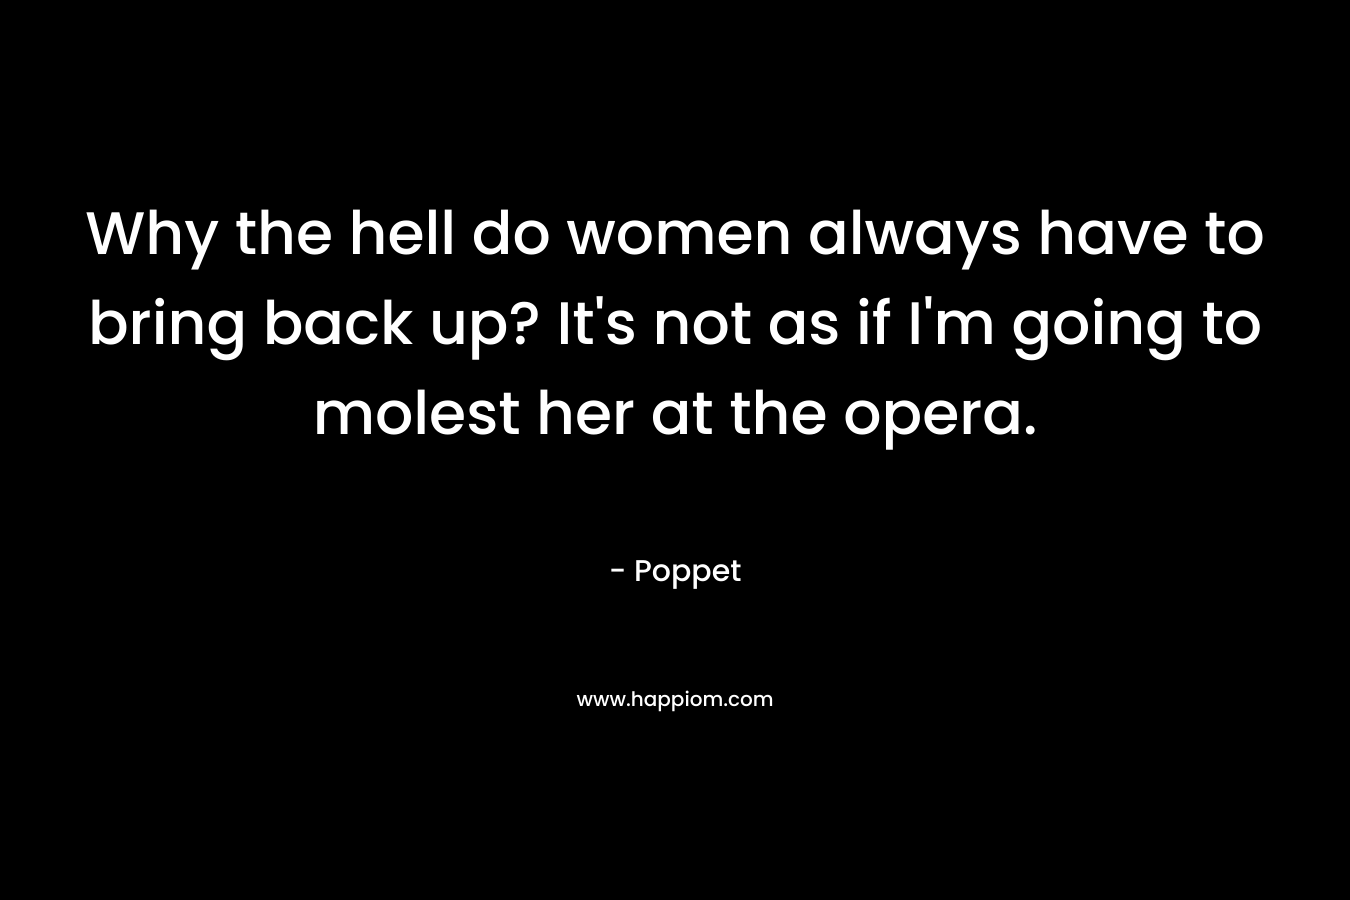 Why the hell do women always have to bring back up? It’s not as if I’m going to molest her at the opera. – Poppet